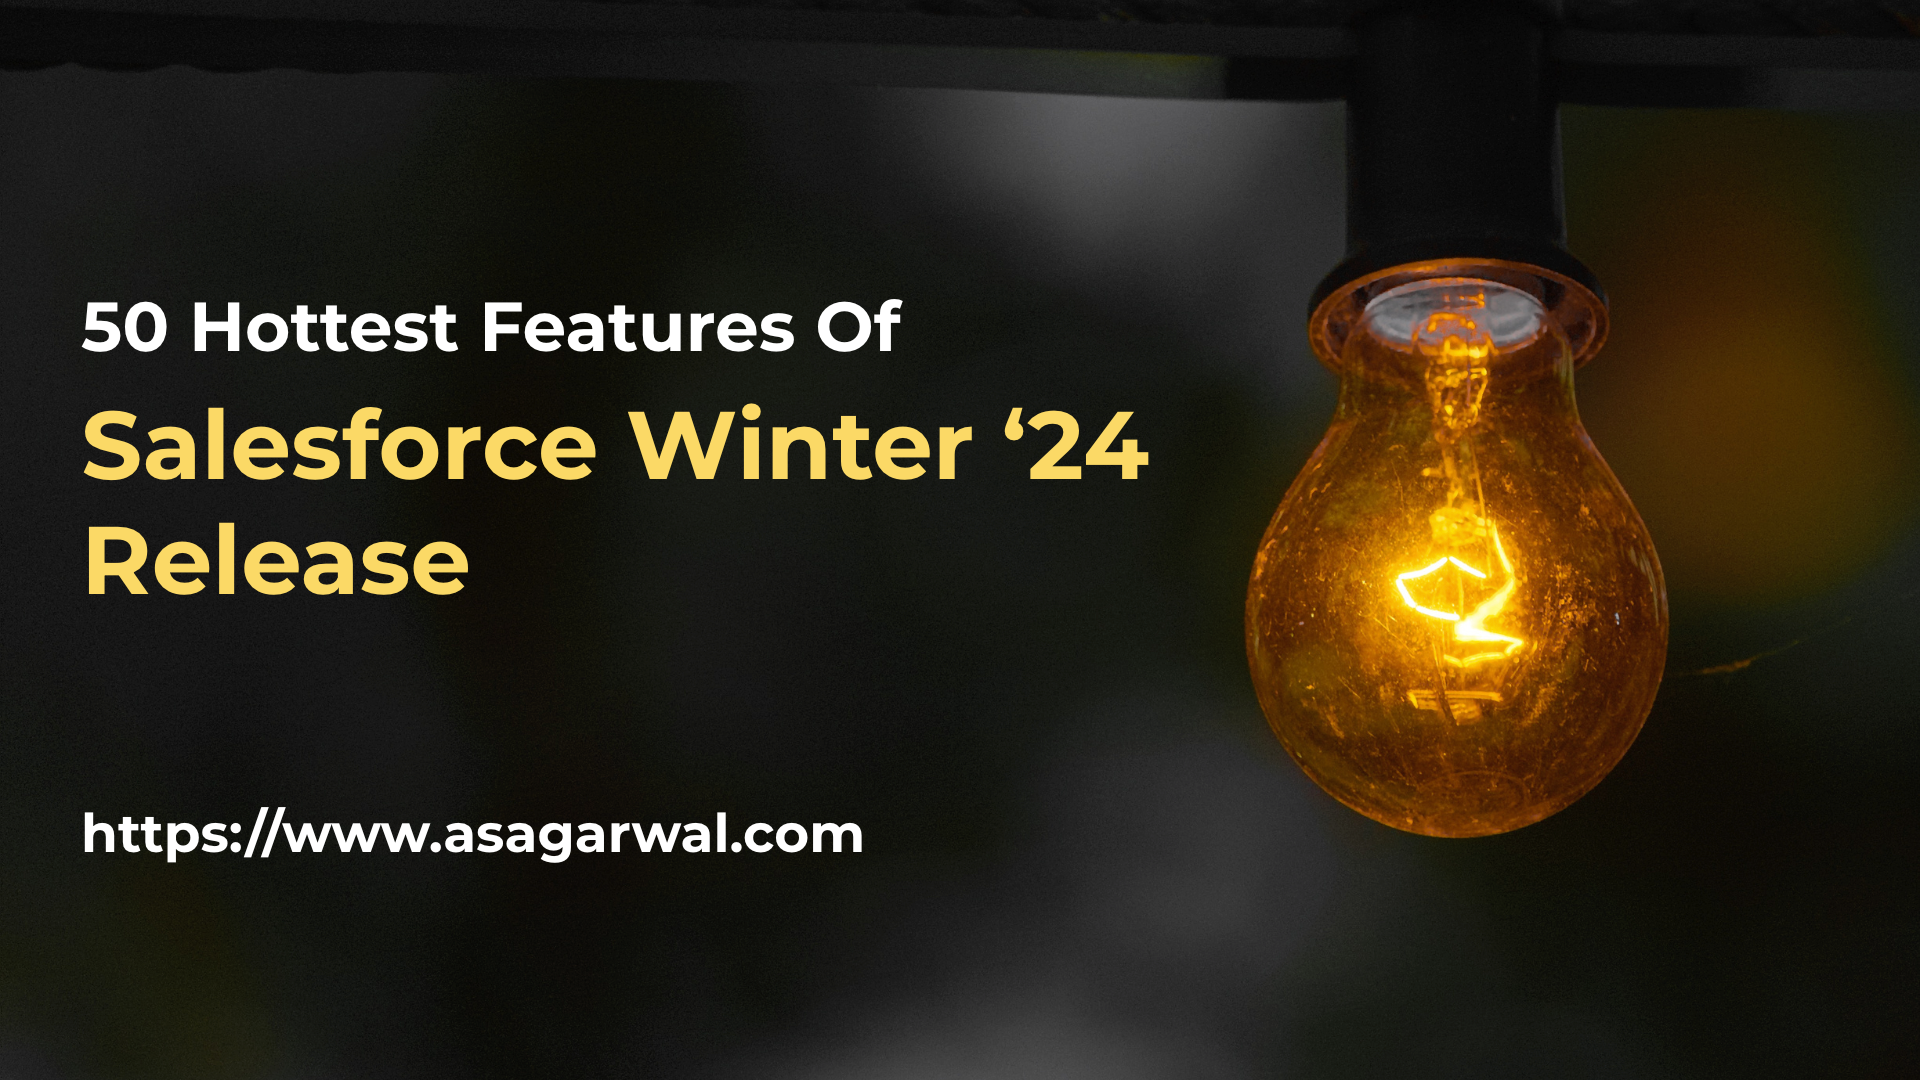 50 Hottest Features of Salesforce Winter '24 Release